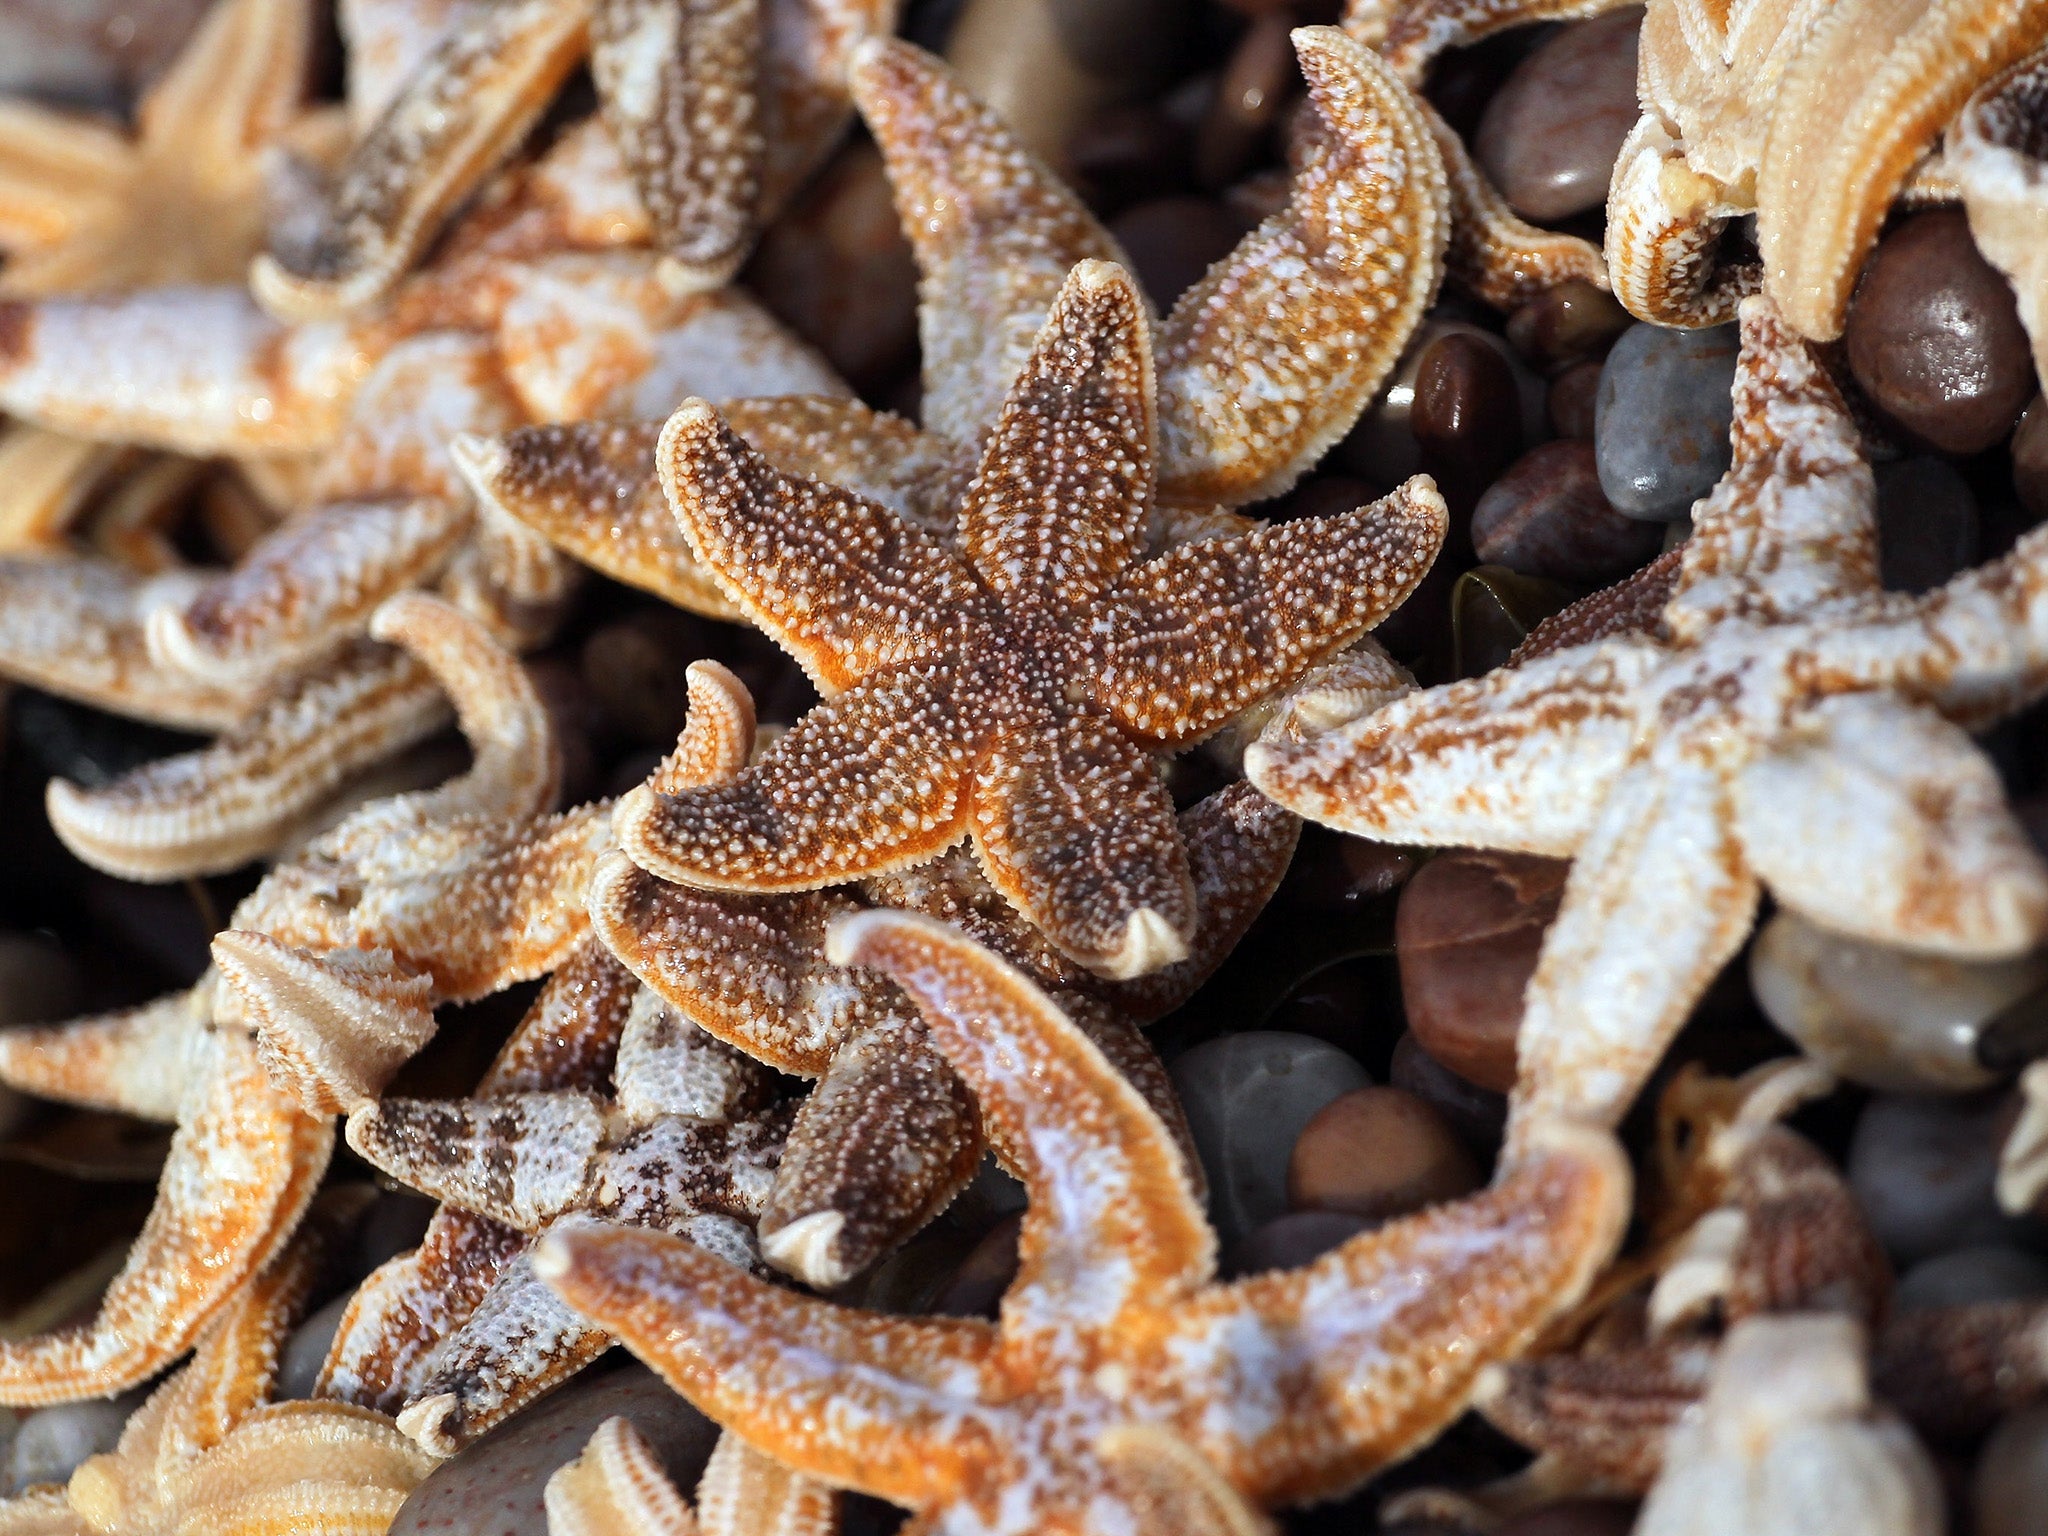 Starfish are highly populous in 'Utopia'